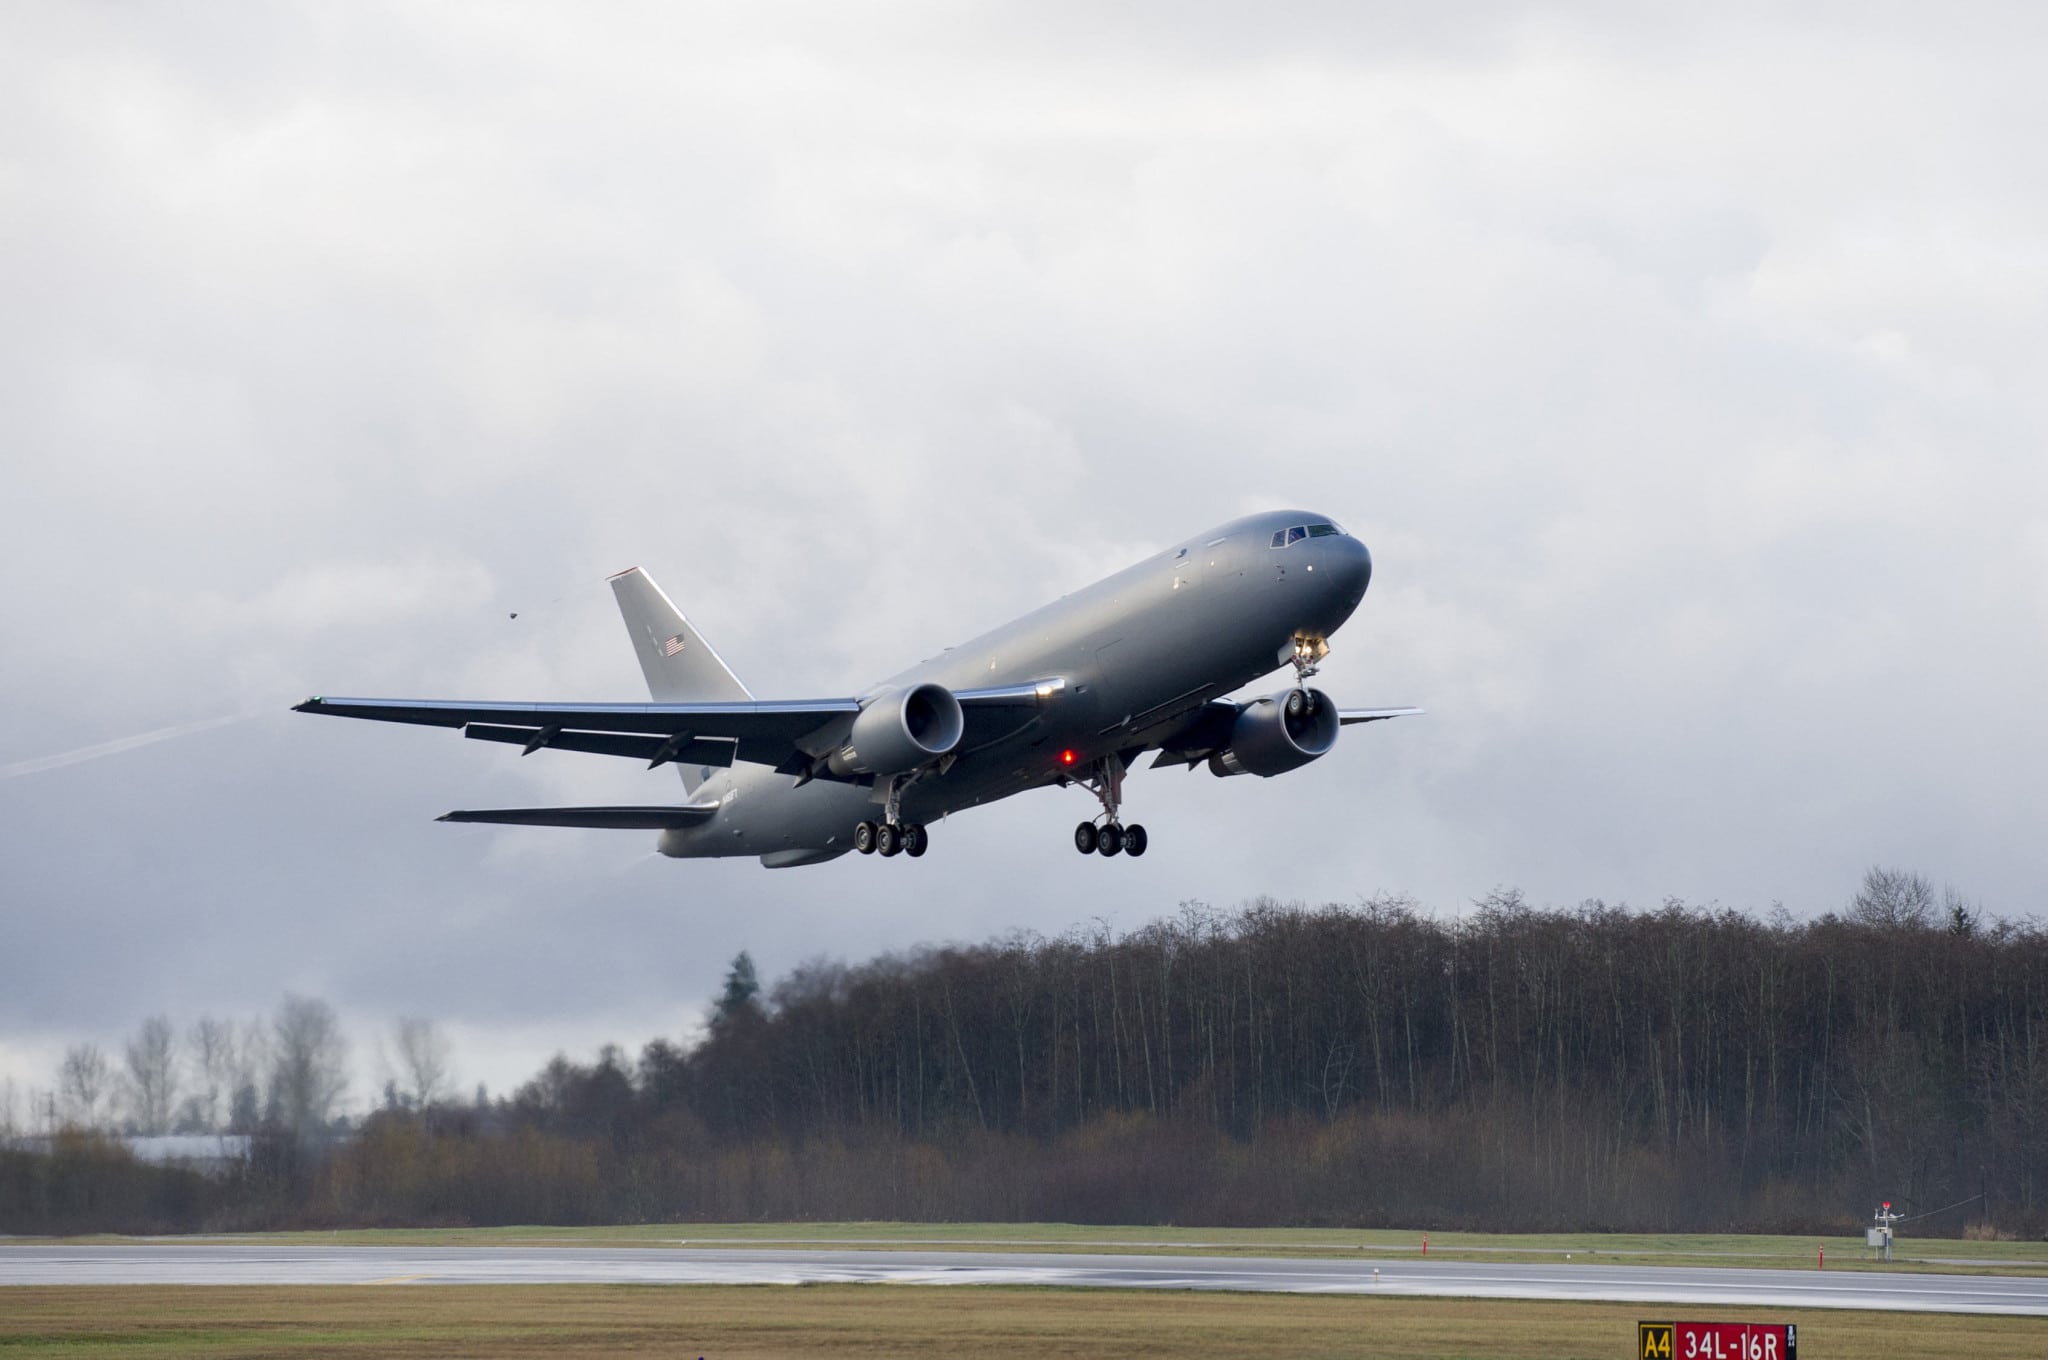 Boeing’s 767-2C variant takes its first test flight as part of the KC-46 ae...